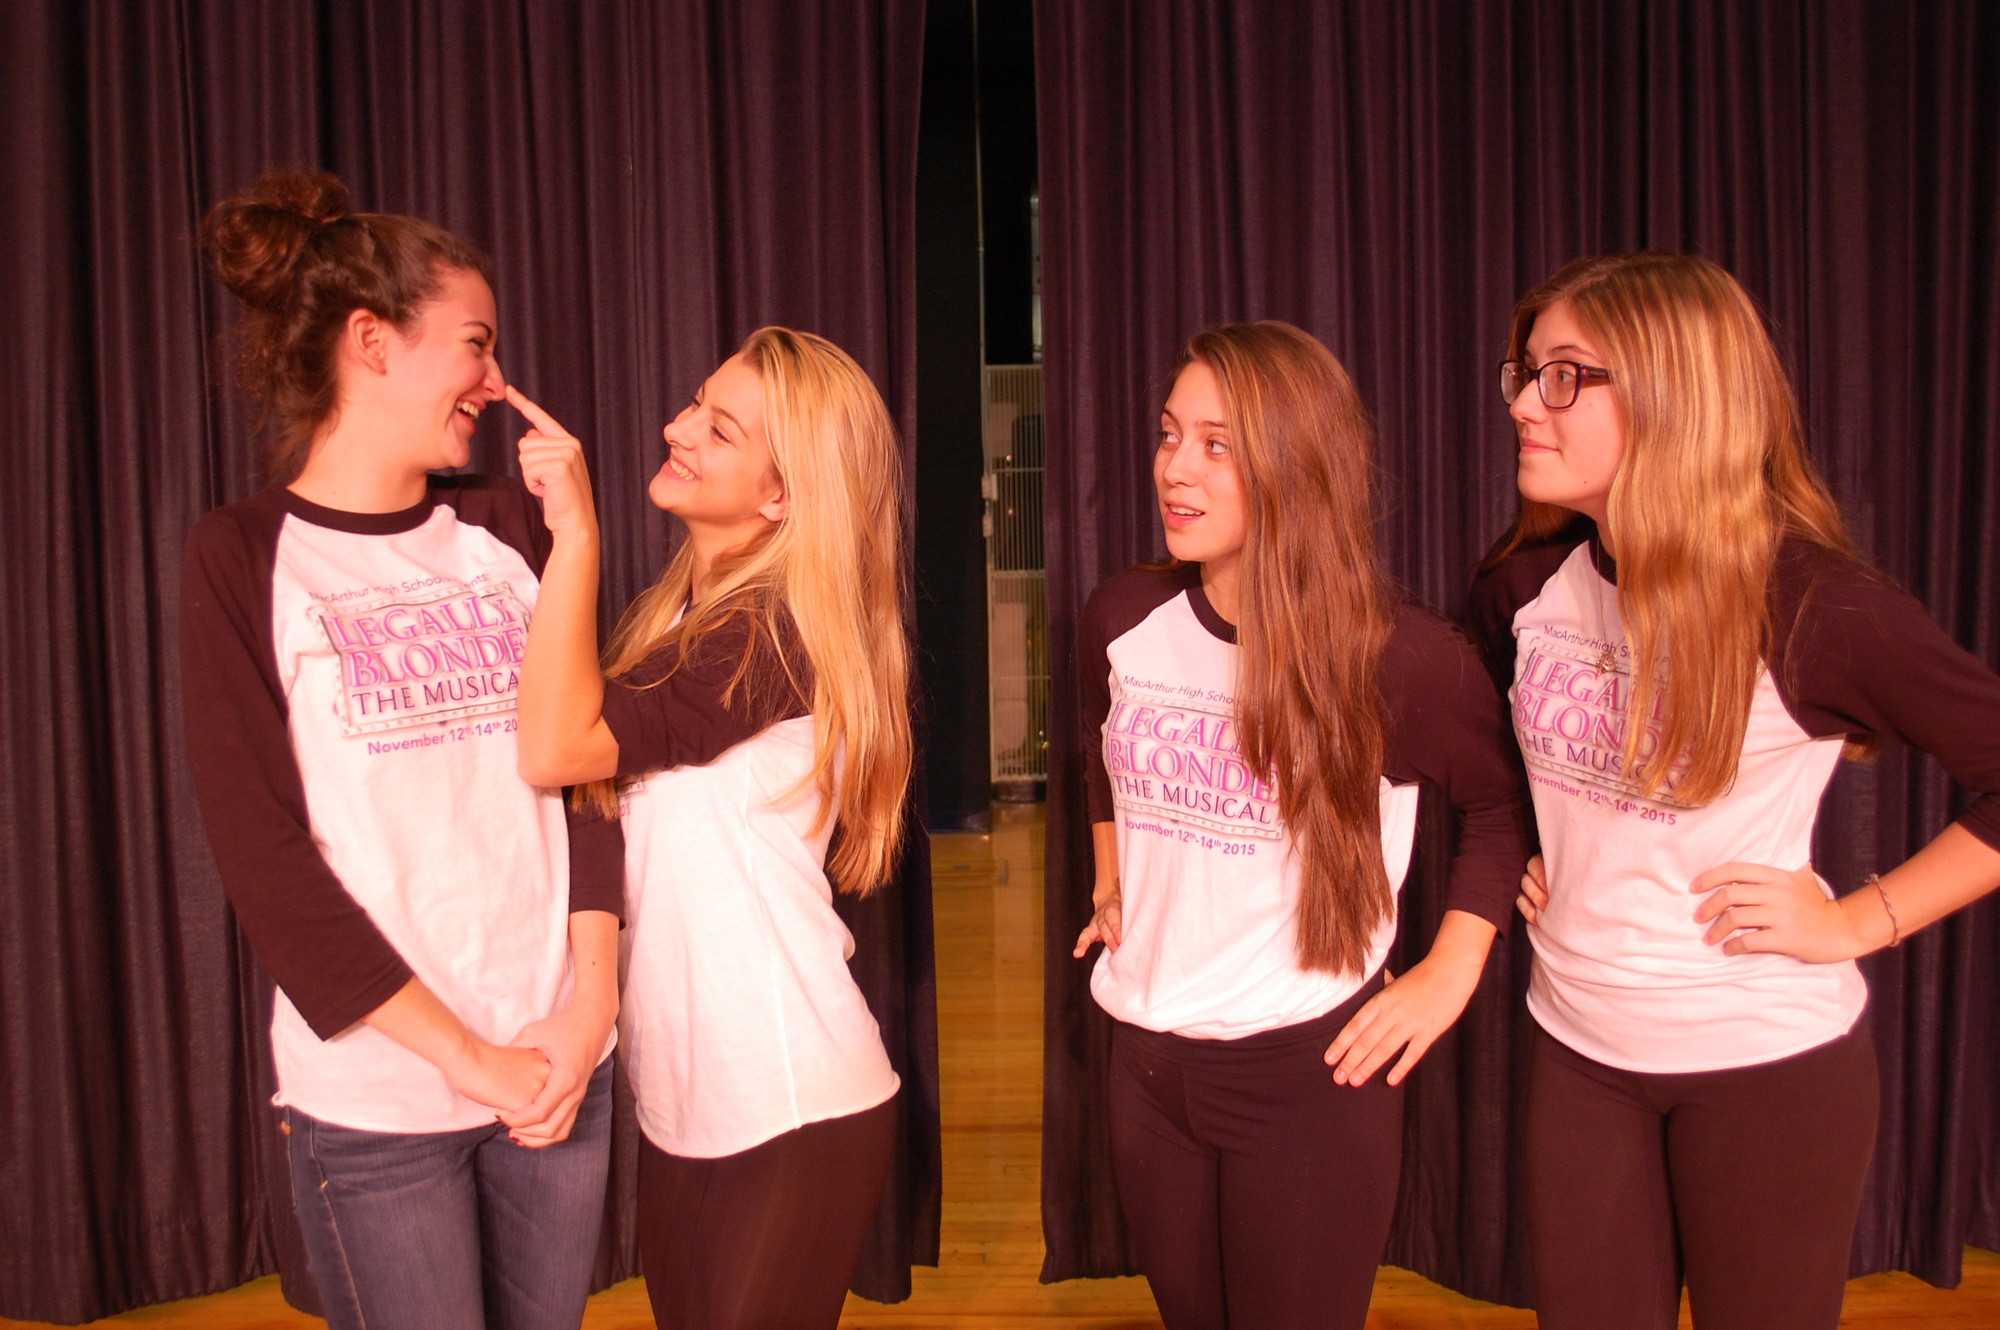 Lead Actress Danielle Ducey, left, who stars as Elle Woods, with her on-stage sorority sisters, Margo (Gia Gatt), Pilar (Camilla Montoya) and Serena (Michelle Shapiro).